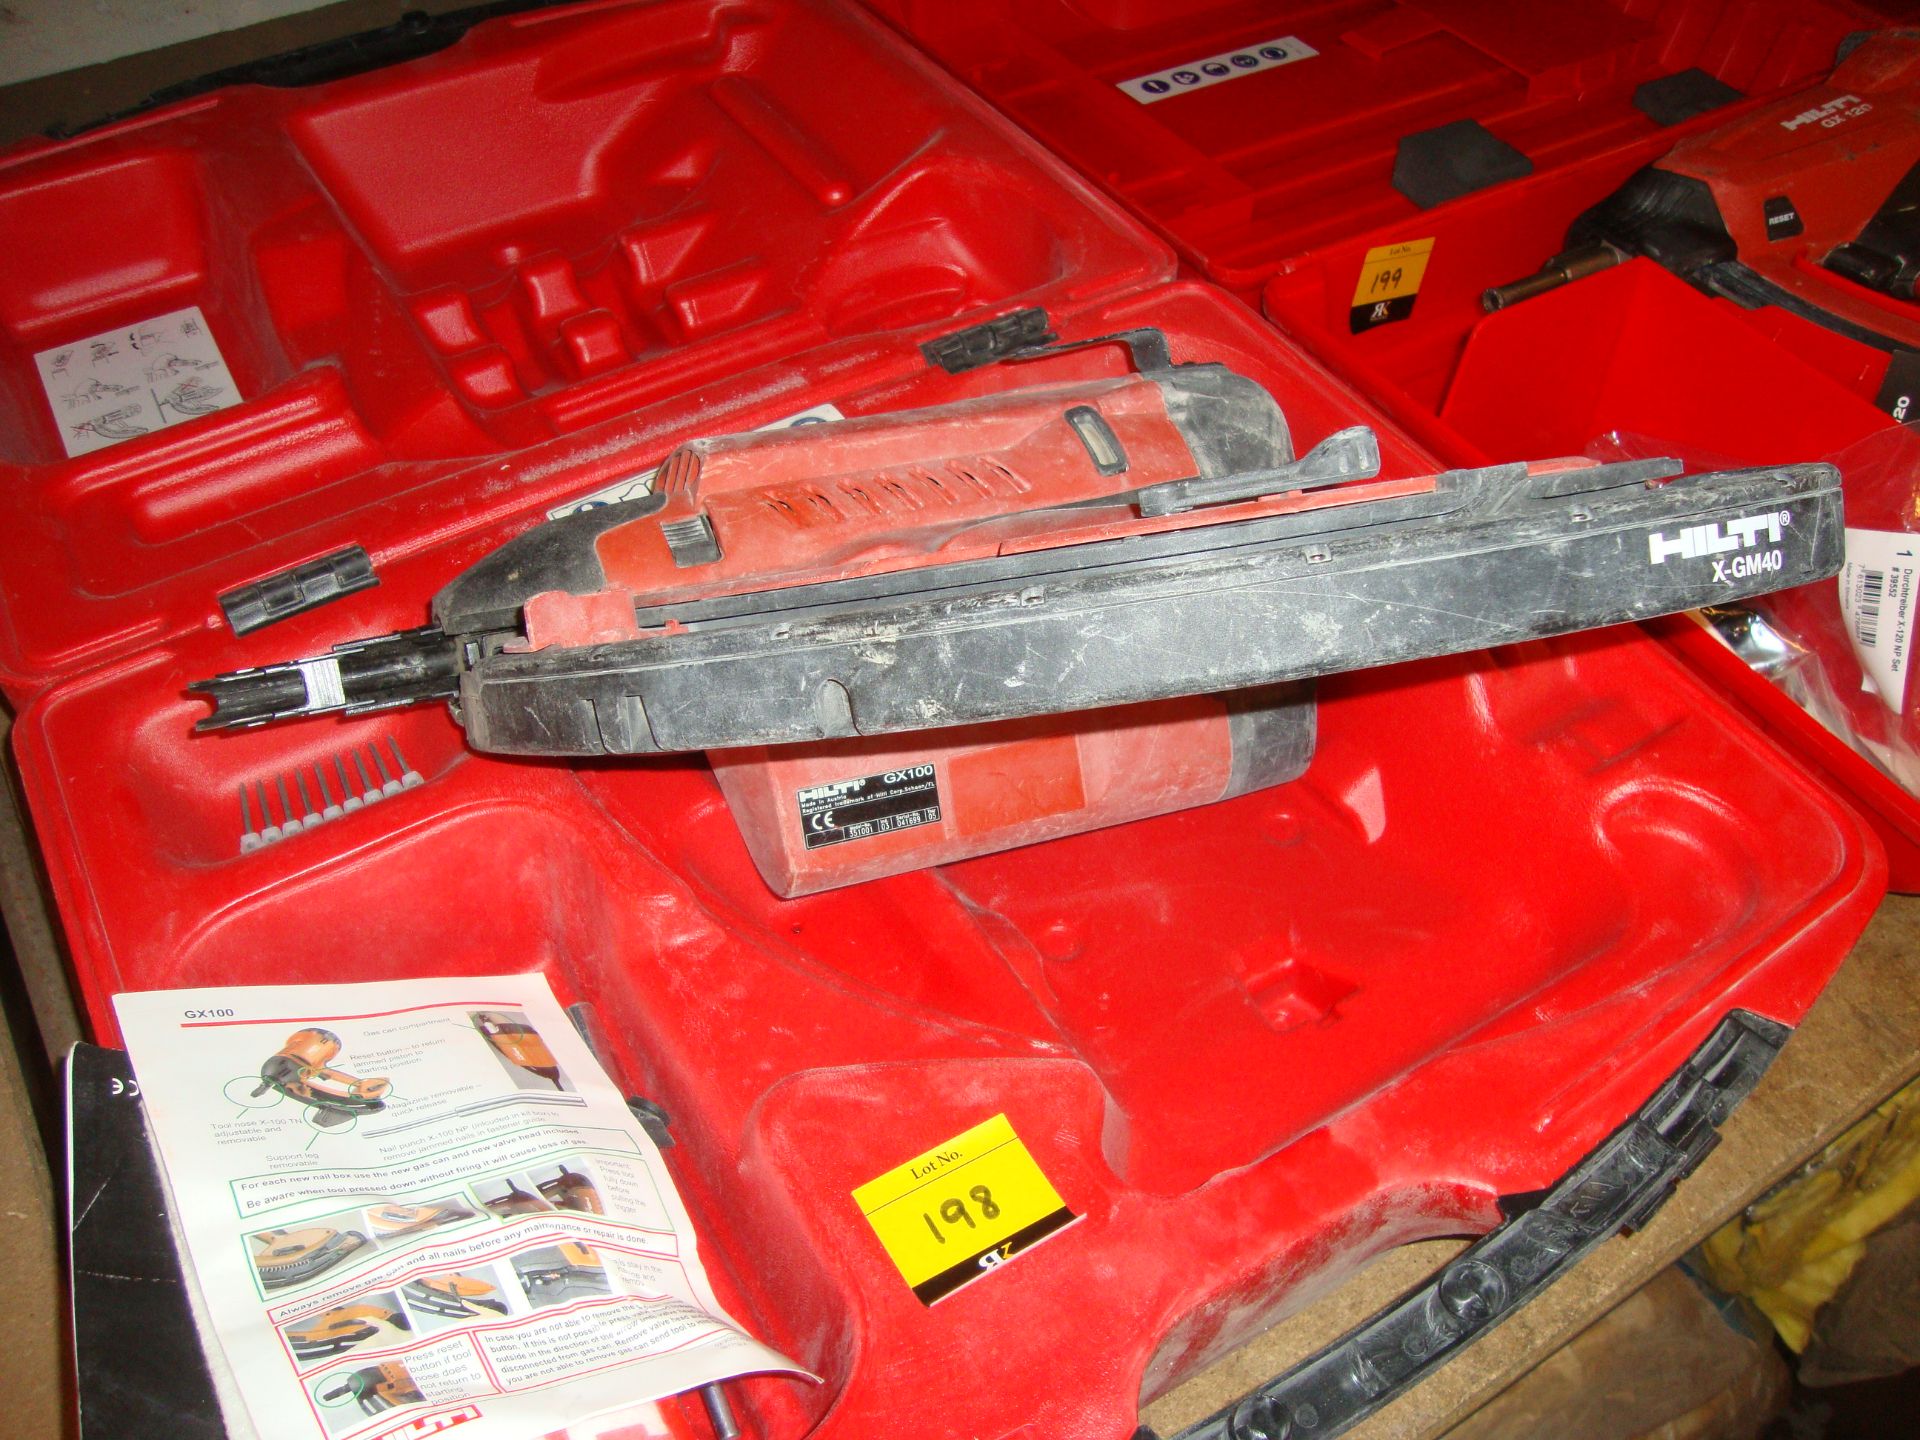 Hilti GX100 nail gun, including case, book pack and other minor ancillary items as pictured - Image 3 of 4